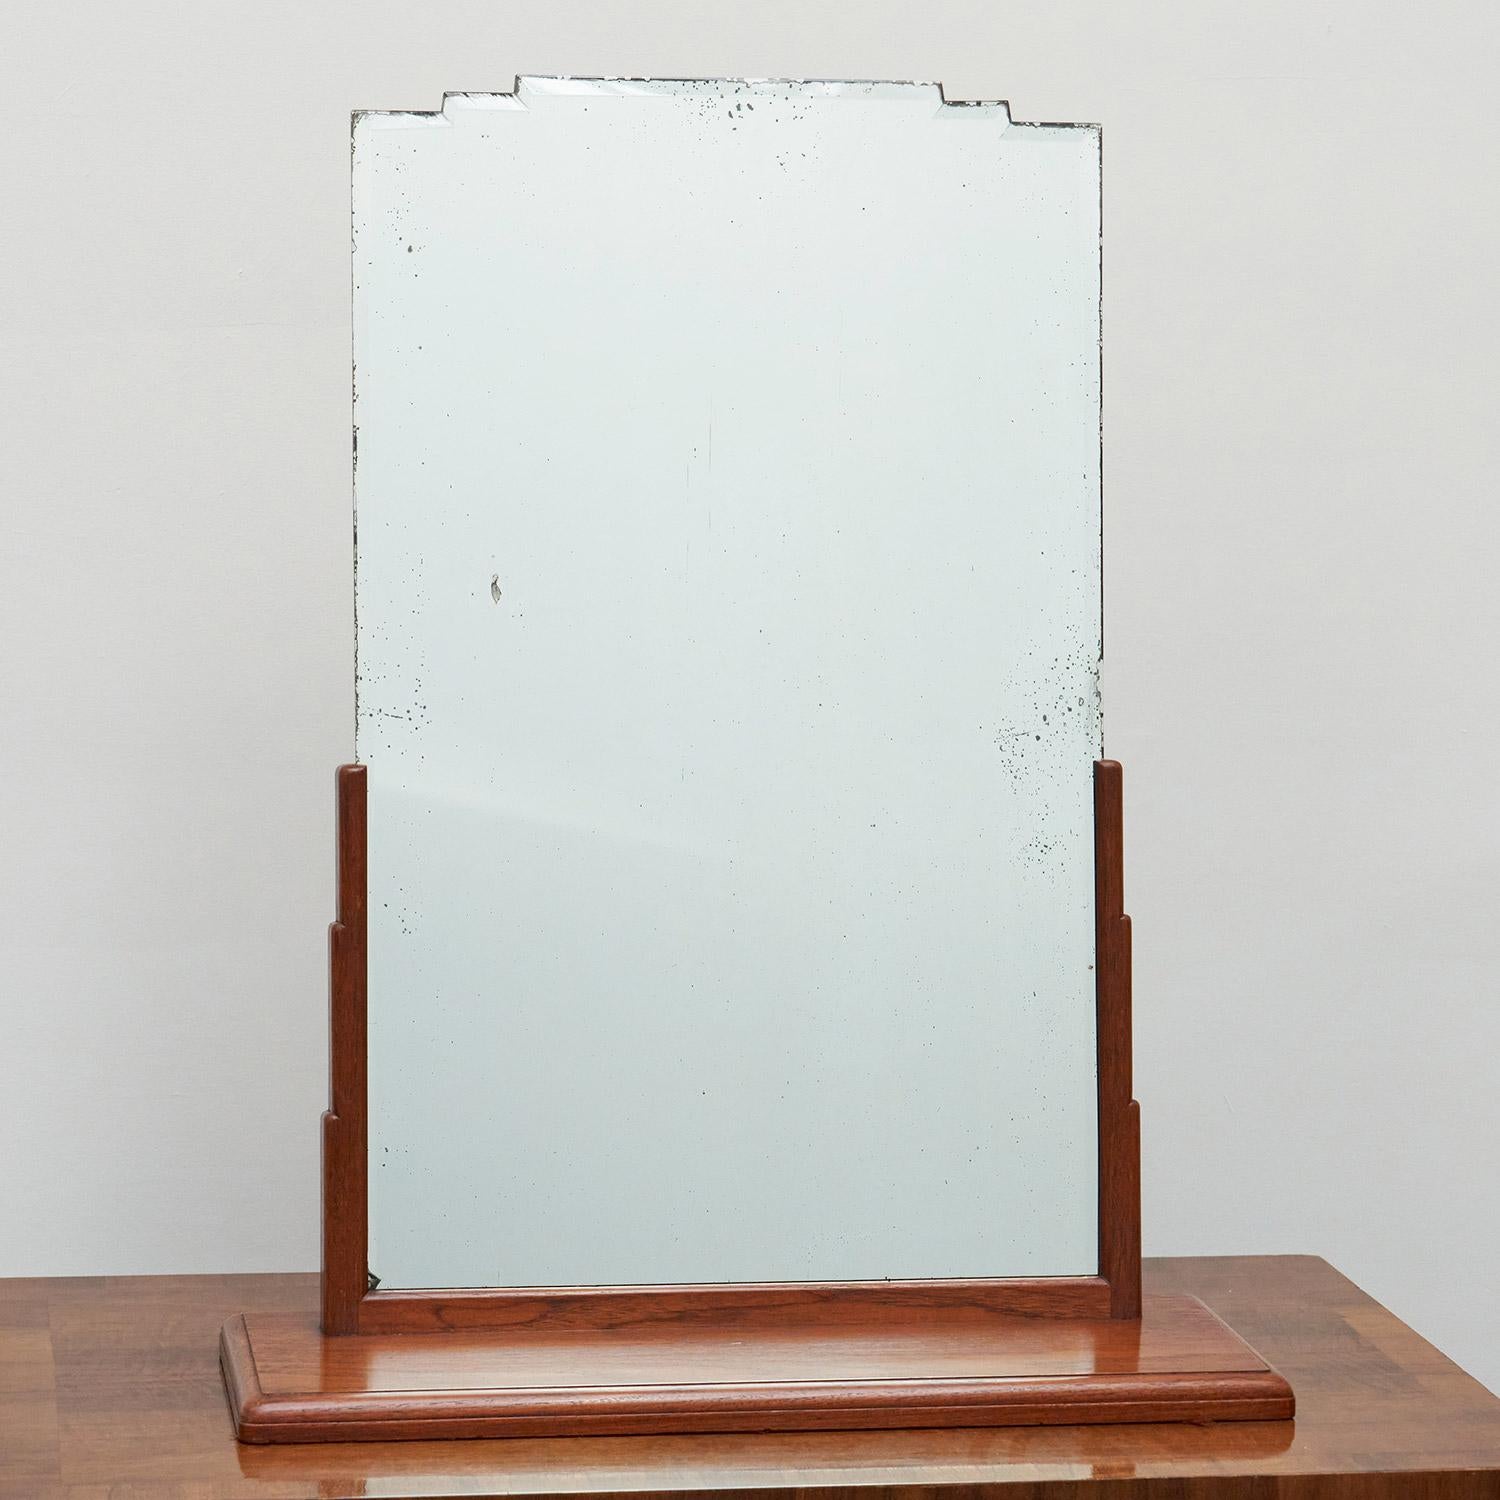 Art Deco Dressing Mirror by Betty Joel. Geometric shaped solid walnut frame with the mirror in good condition also with shaped top. 

Dimensions: H 79cm W 63cm D 22cm 

Origin: English

Date: Circa 1930

Item Number: 902227

Betty Joel was